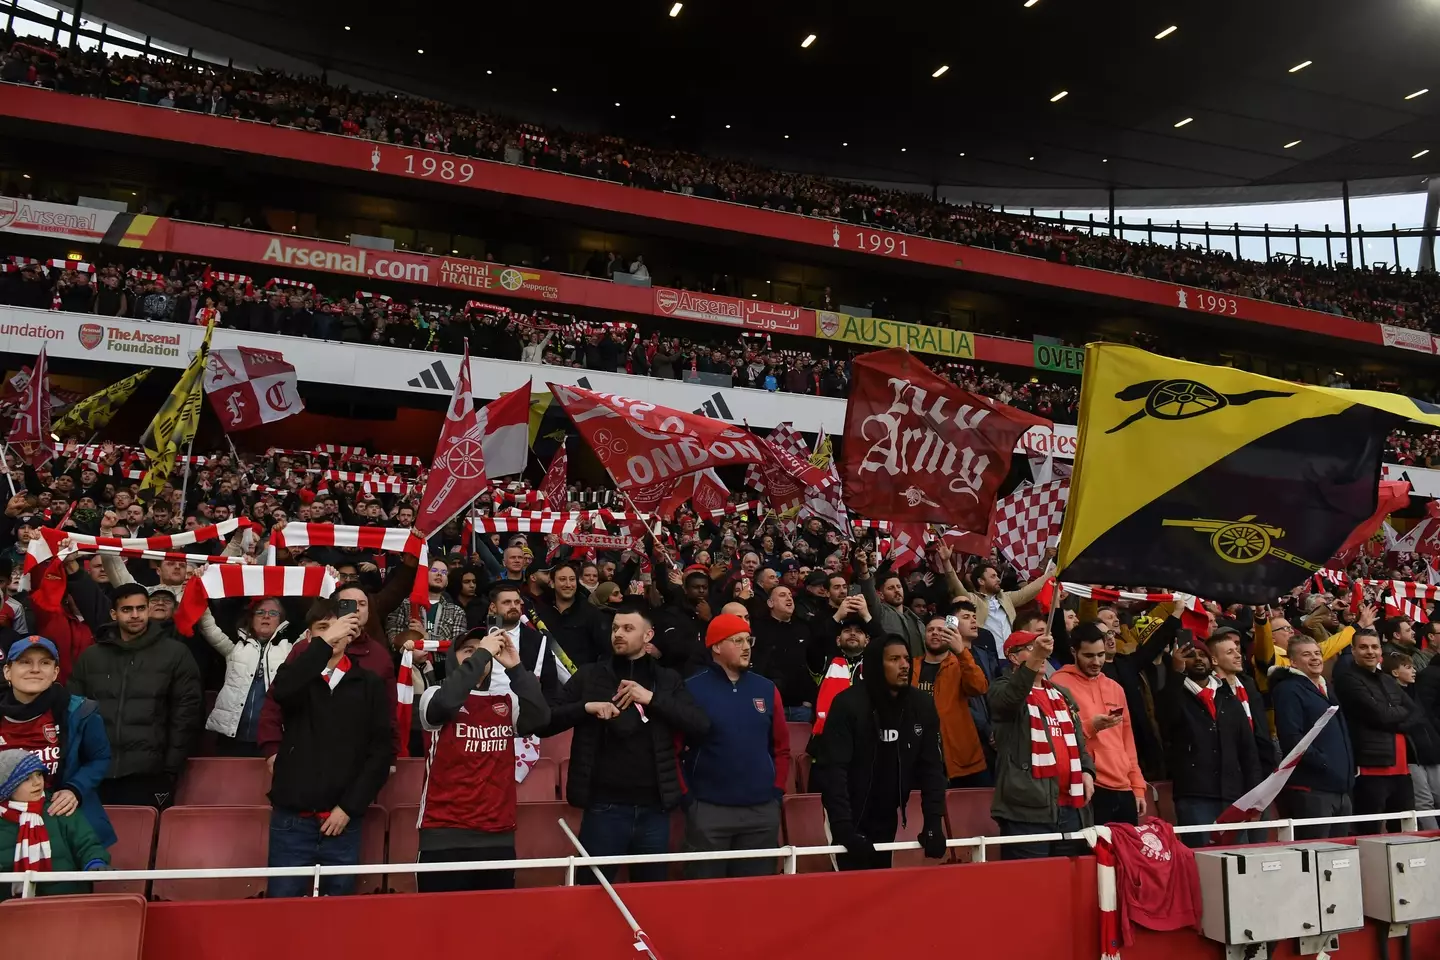 Arsenal fans at The Emirates